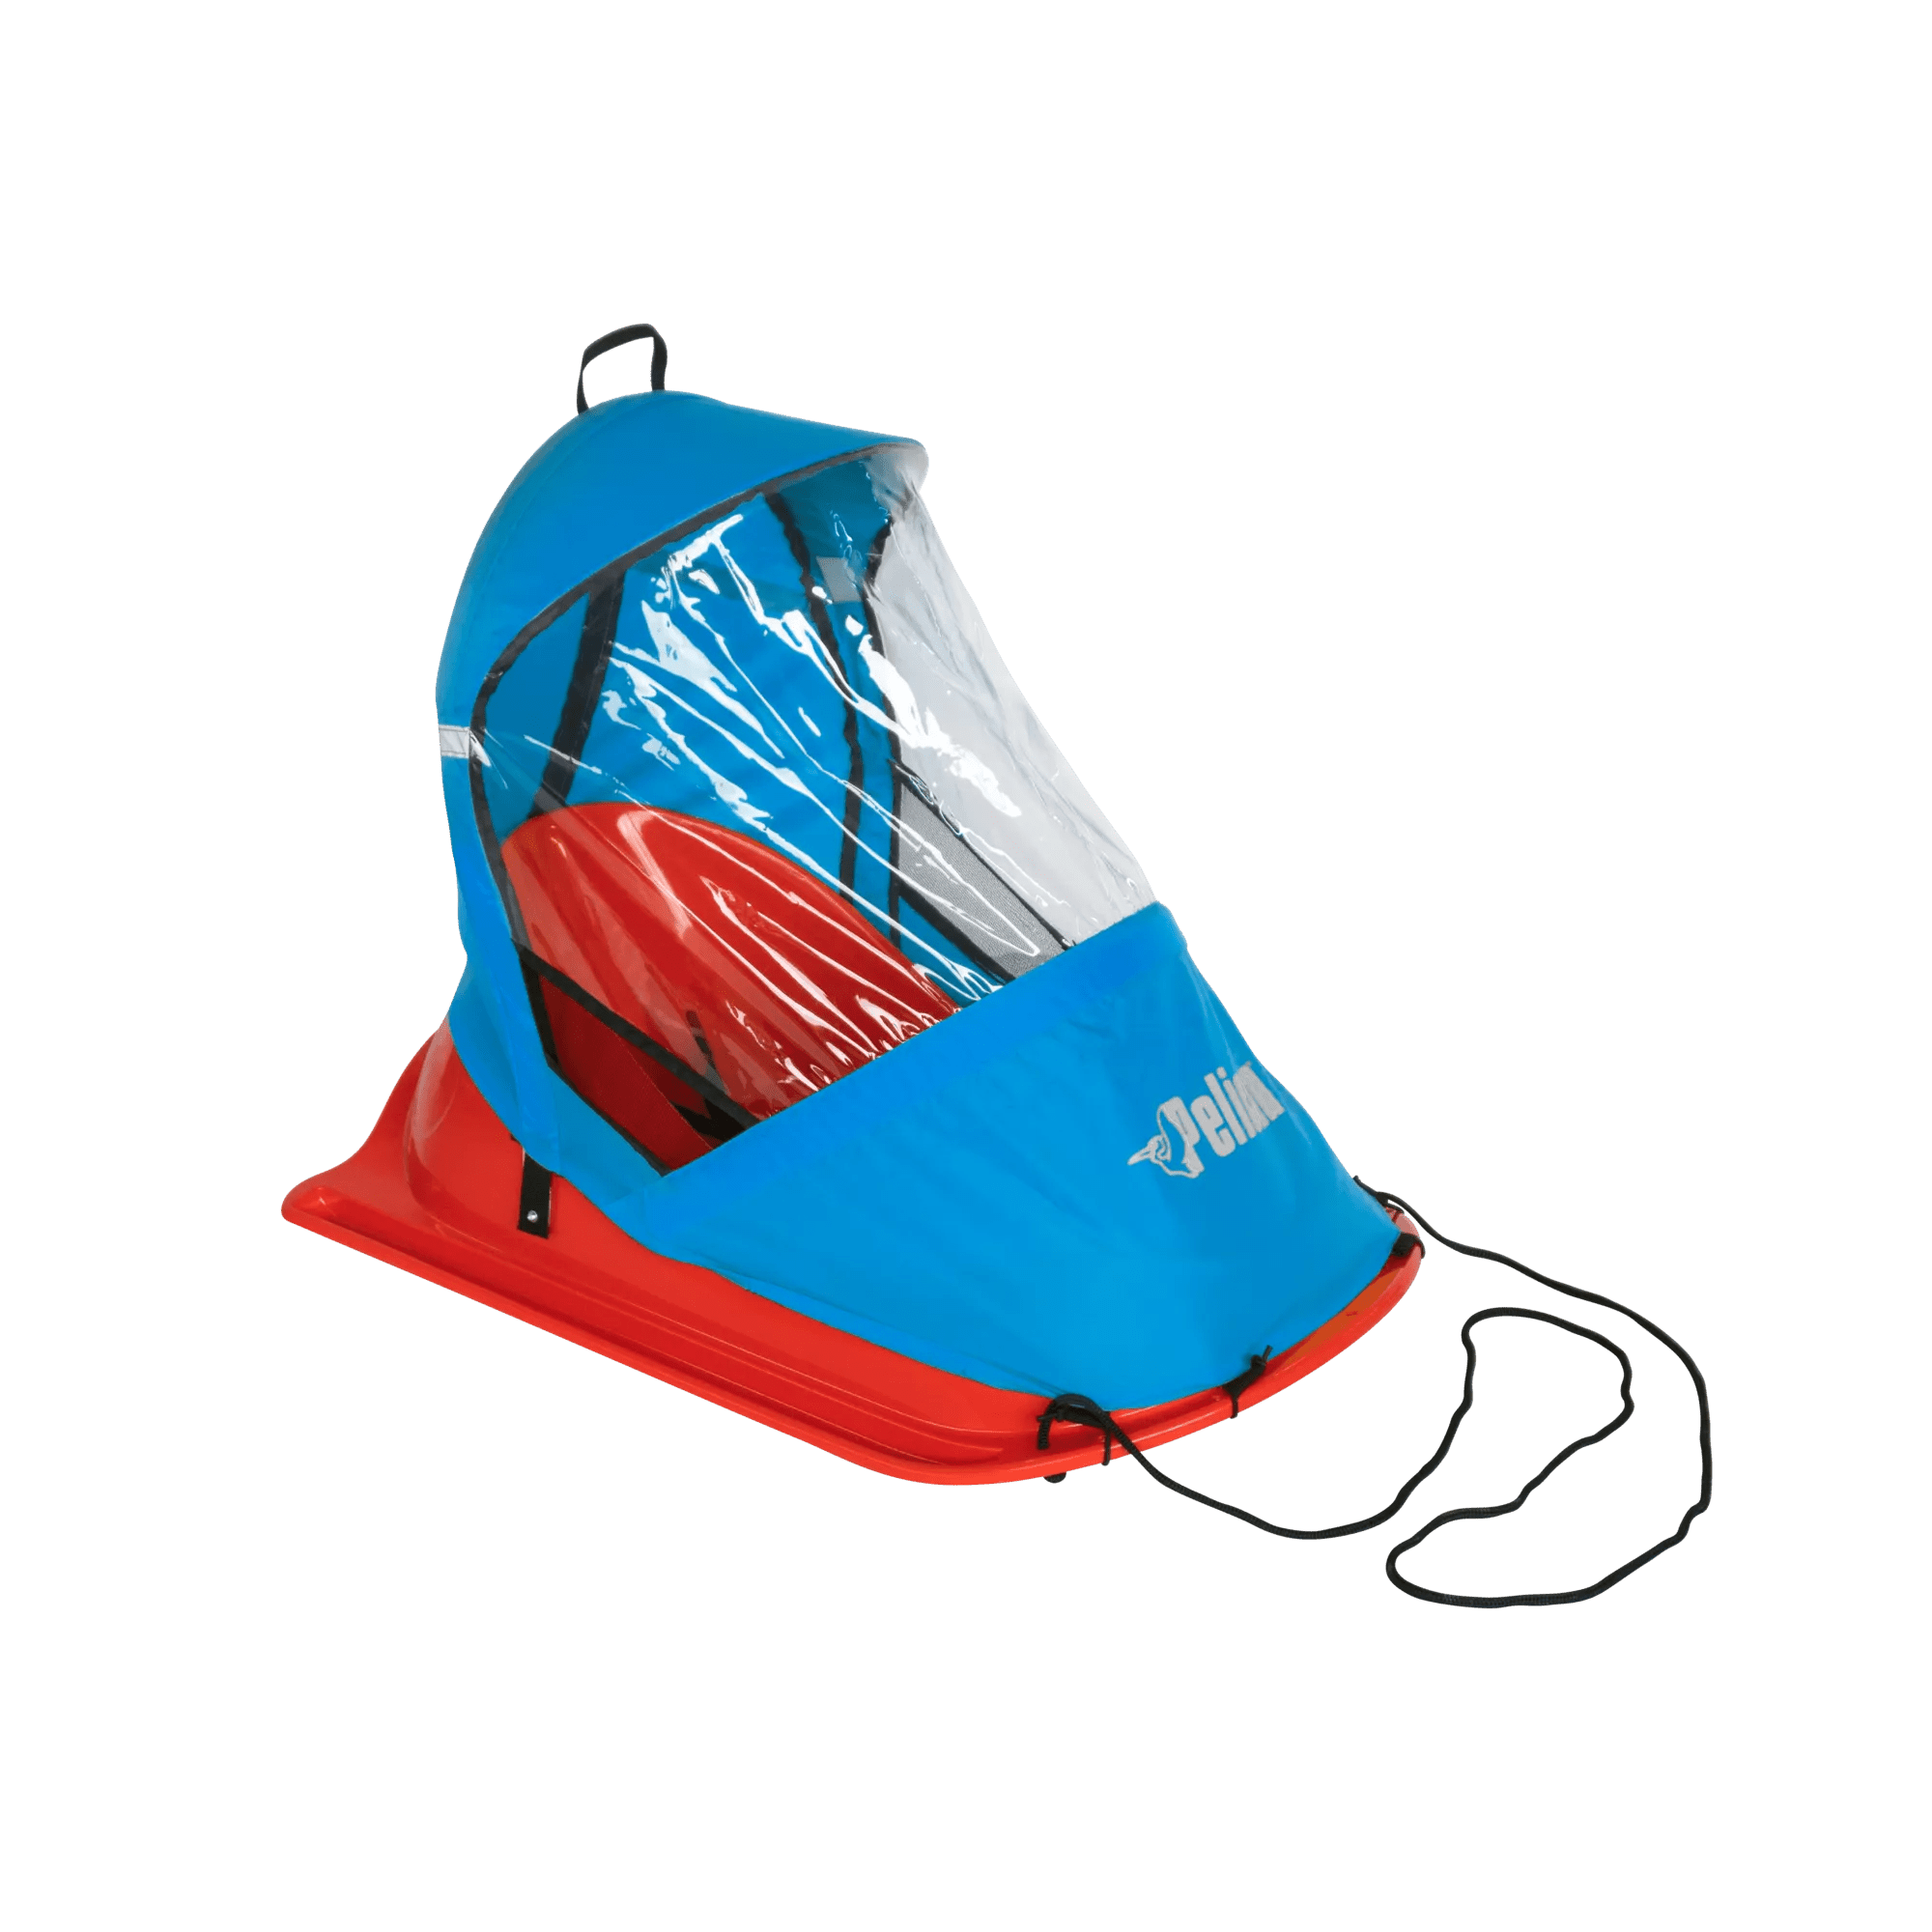 PELICAN - Bady Sled Deluxe - Red - LEI33PK06-00 - ISO